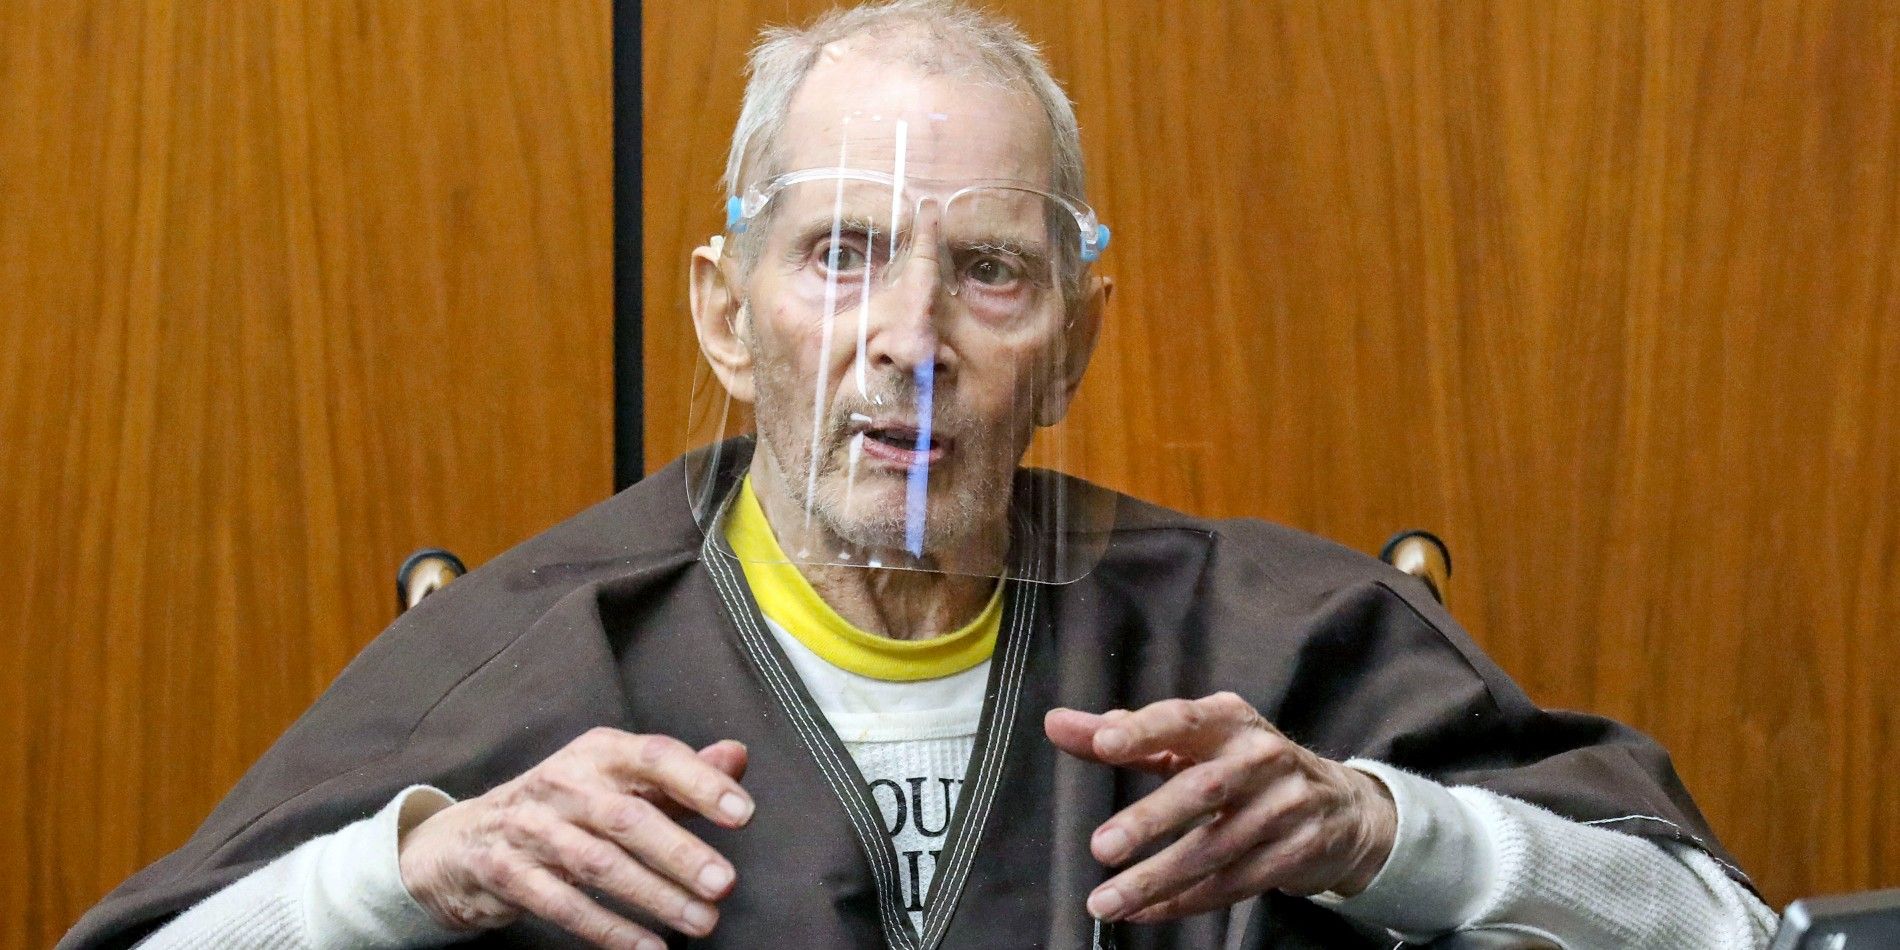 Robert Durst wearing a face shield and speaking in court